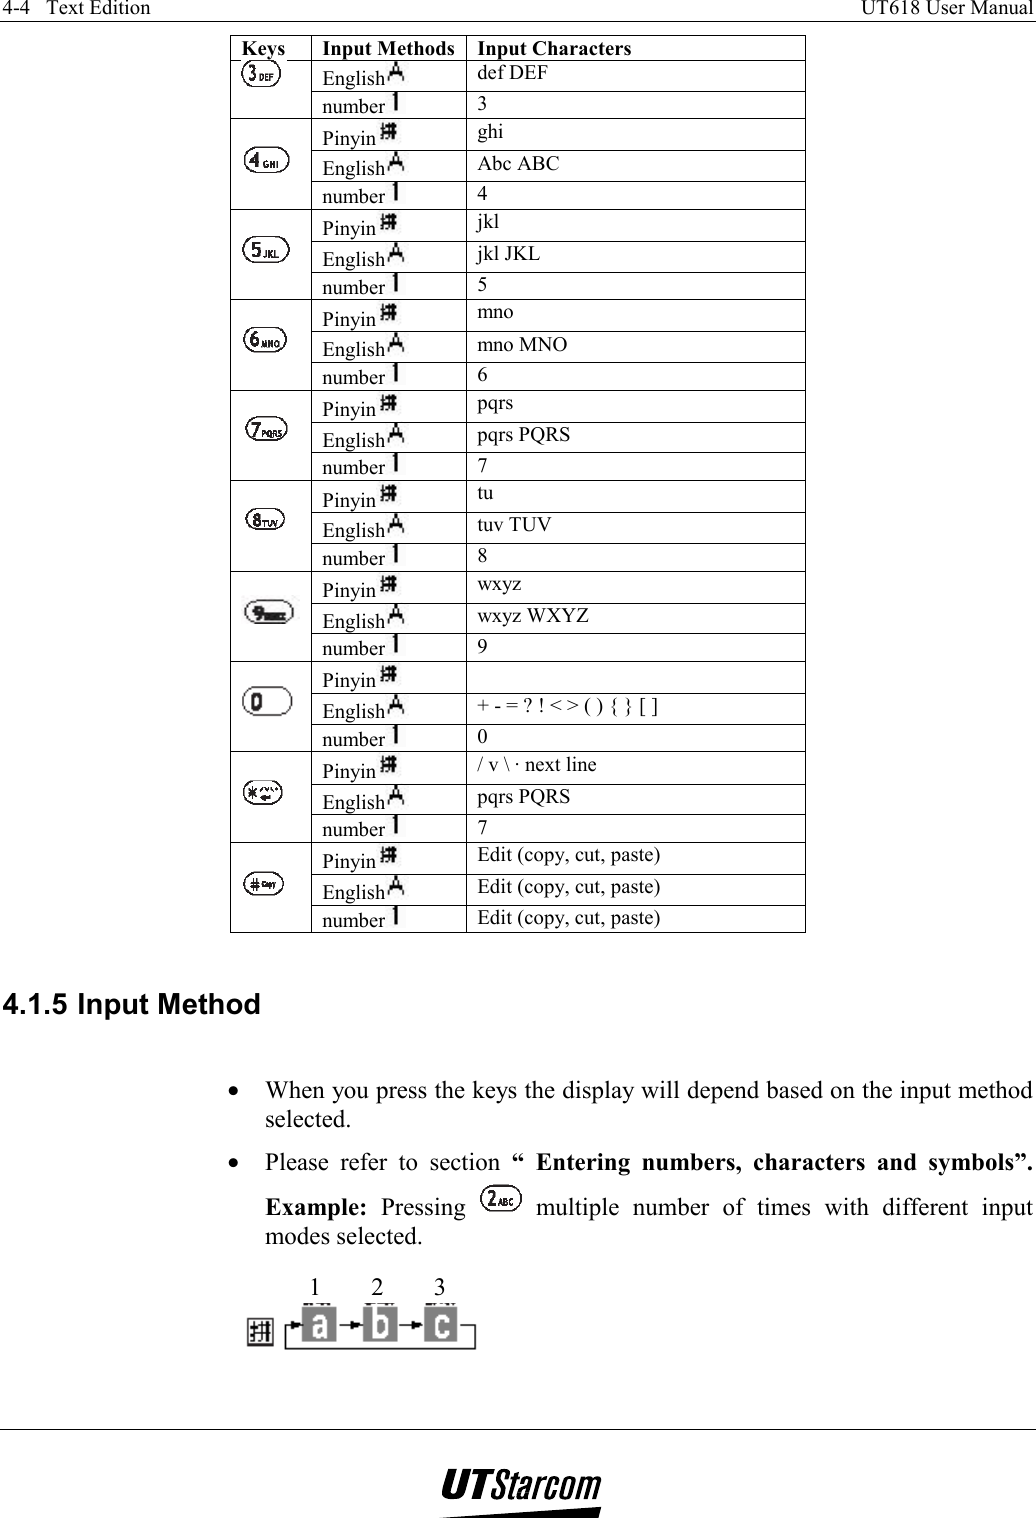 4-4   Text Edition    UT618 User Manual   Keys  Input Methods  Input Characters English  def DEF  number  3 Pinyin  ghi English  Abc ABC    number  4 Pinyin  jkl English  jkl JKL   number  5 Pinyin  mno English  mno MNO    number  6 Pinyin  pqrs English  pqrs PQRS   number  7 Pinyin  tu English  tuv TUV   number  8 Pinyin  wxyz English  wxyz WXYZ   number  9 Pinyin   English  + - = ? ! &lt; &gt; ( ) { } [ ]   number  0 Pinyin  / v \ · next line English  pqrs PQRS   number  7 Pinyin  Edit (copy, cut, paste) English  Edit (copy, cut, paste)   number  Edit (copy, cut, paste)  4.1.5 Input Method  •  When you press the keys the display will depend based on the input method selected.  •  Please refer to section “ Entering numbers, characters and symbols”. Example: Pressing   multiple number of times with different input modes selected.   123